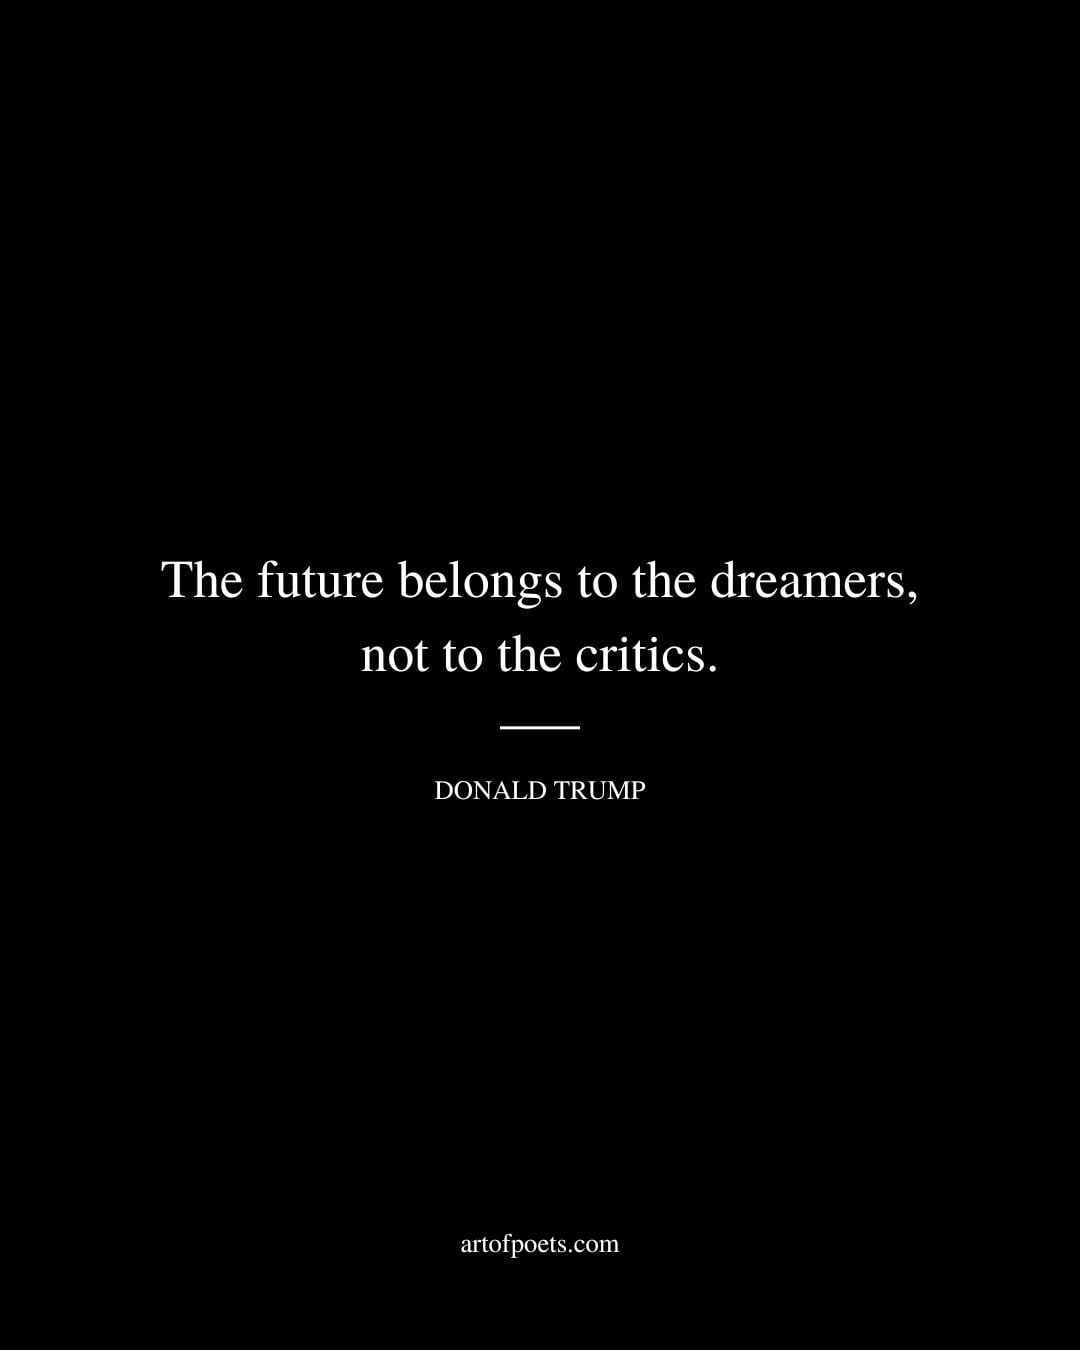 The future belongs to the dreamers not to the critics